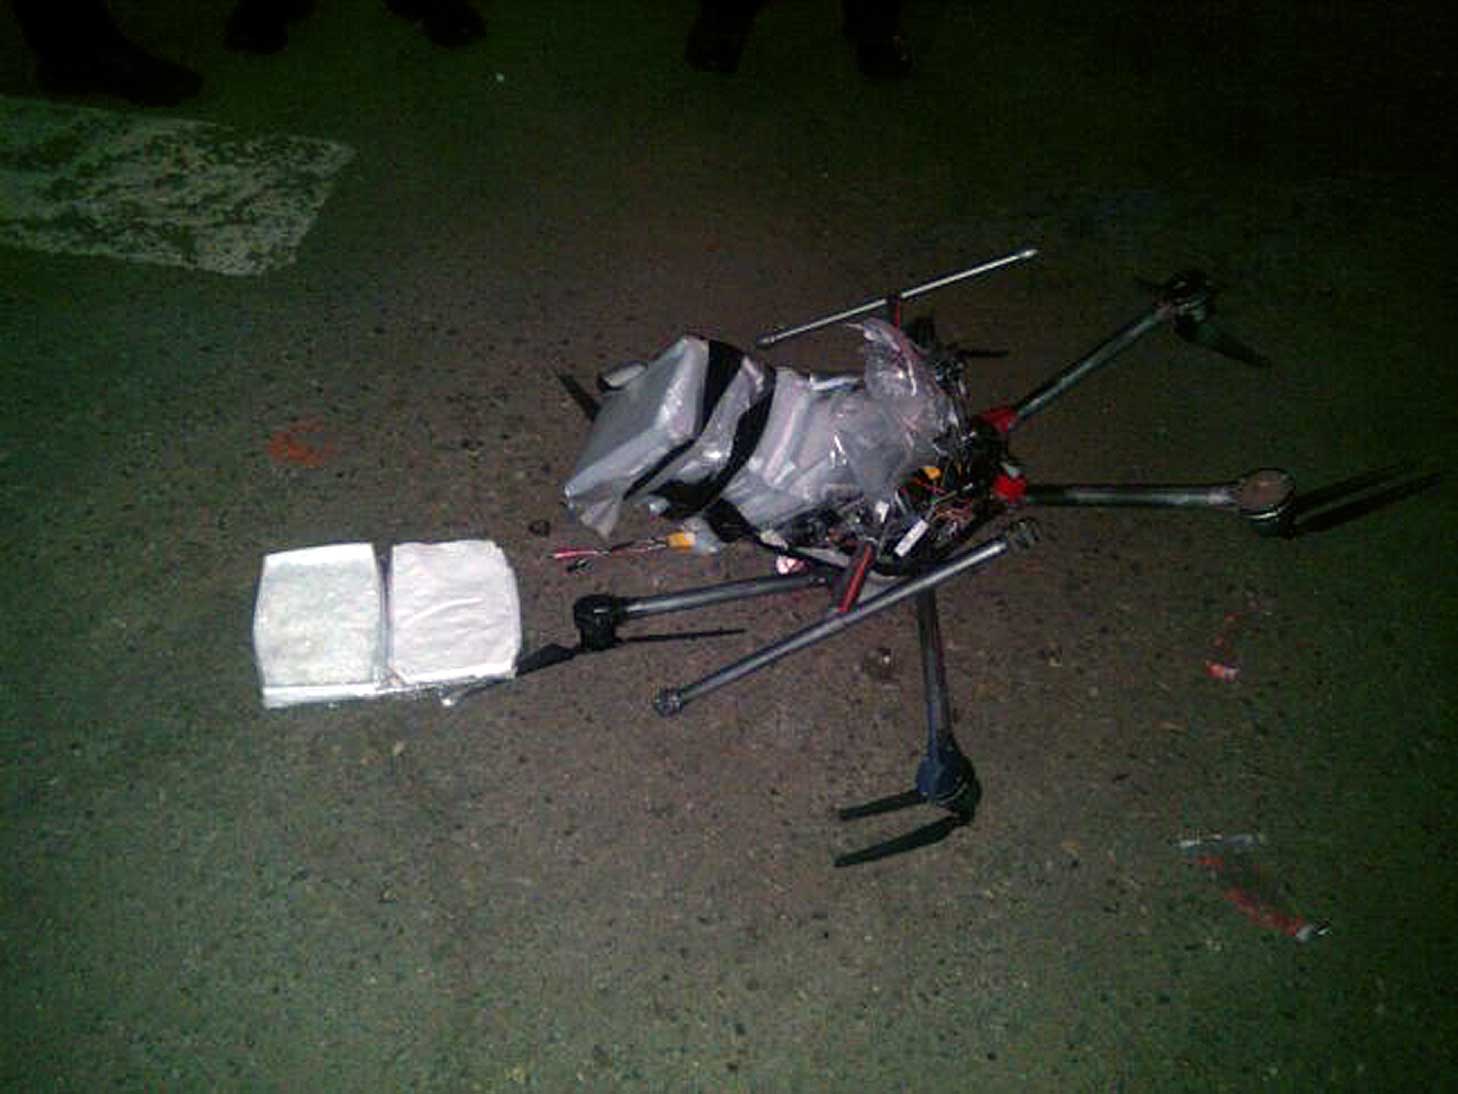 A drone loaded with packages containing methamphetamine lies on the ground after it crashed into a supermarket parking lot in the city of Tijuana on Jan. 20, 2015.